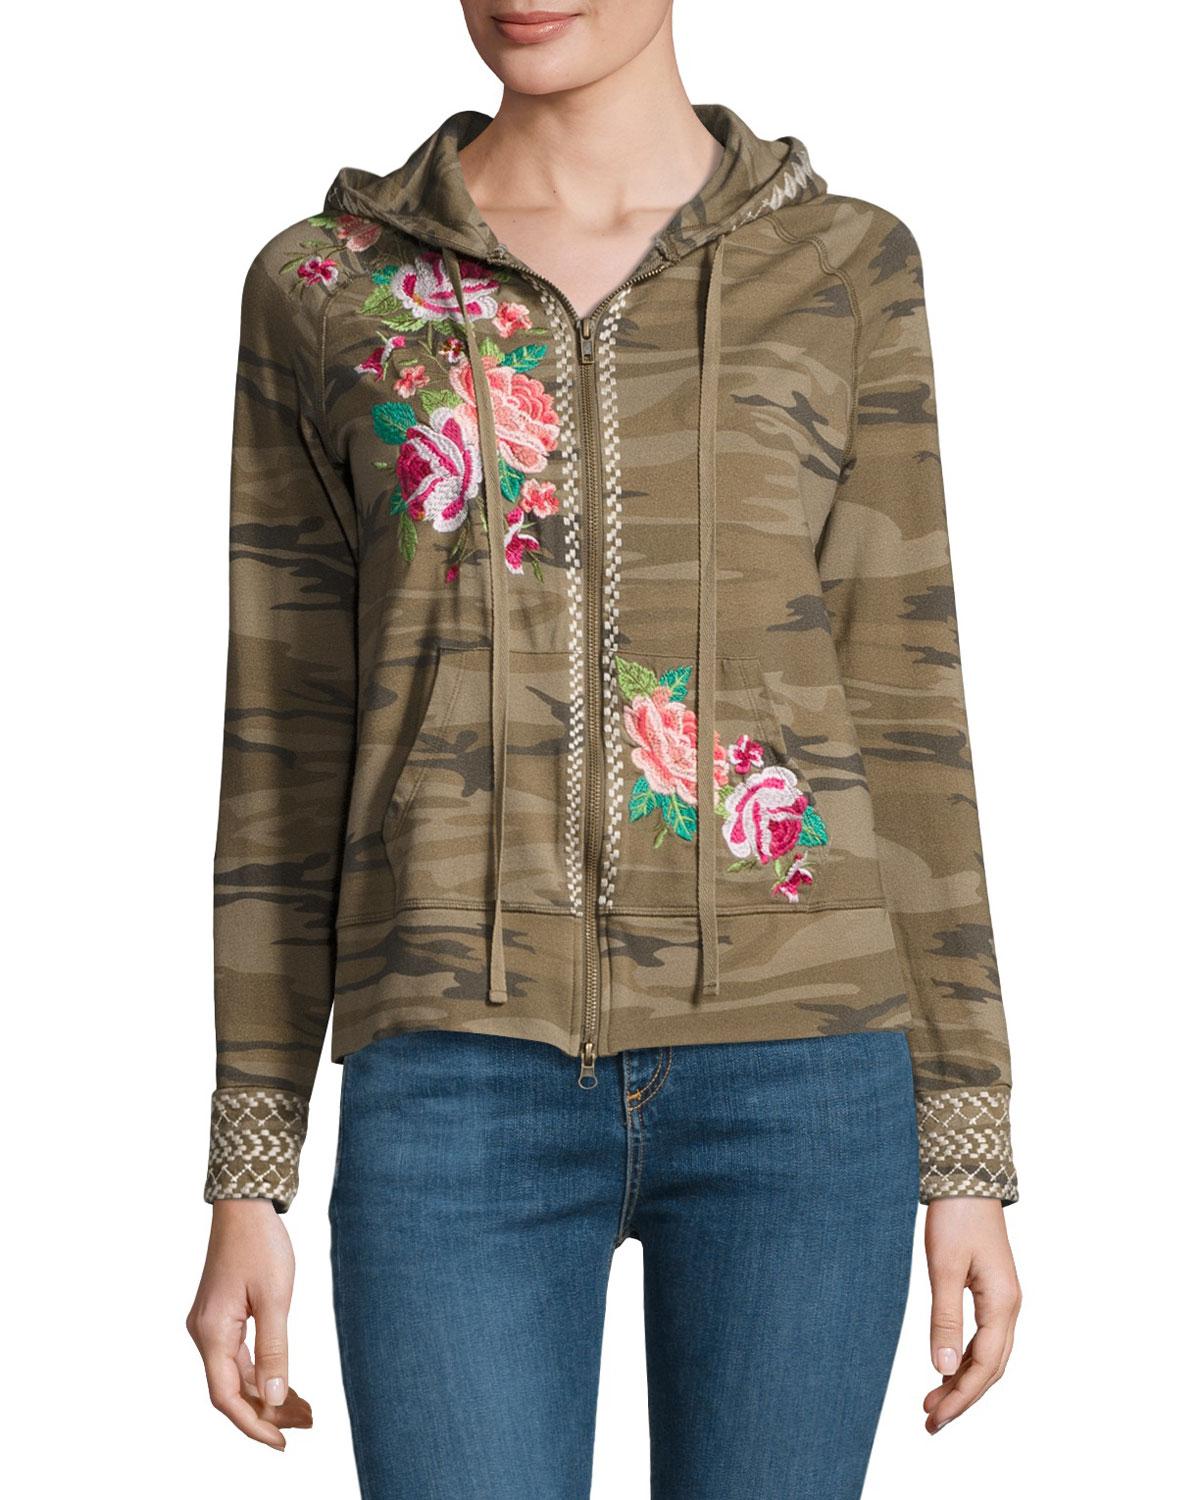 Lyst - Johnny Was Dorana Embroidered Camo Hoodie in Black